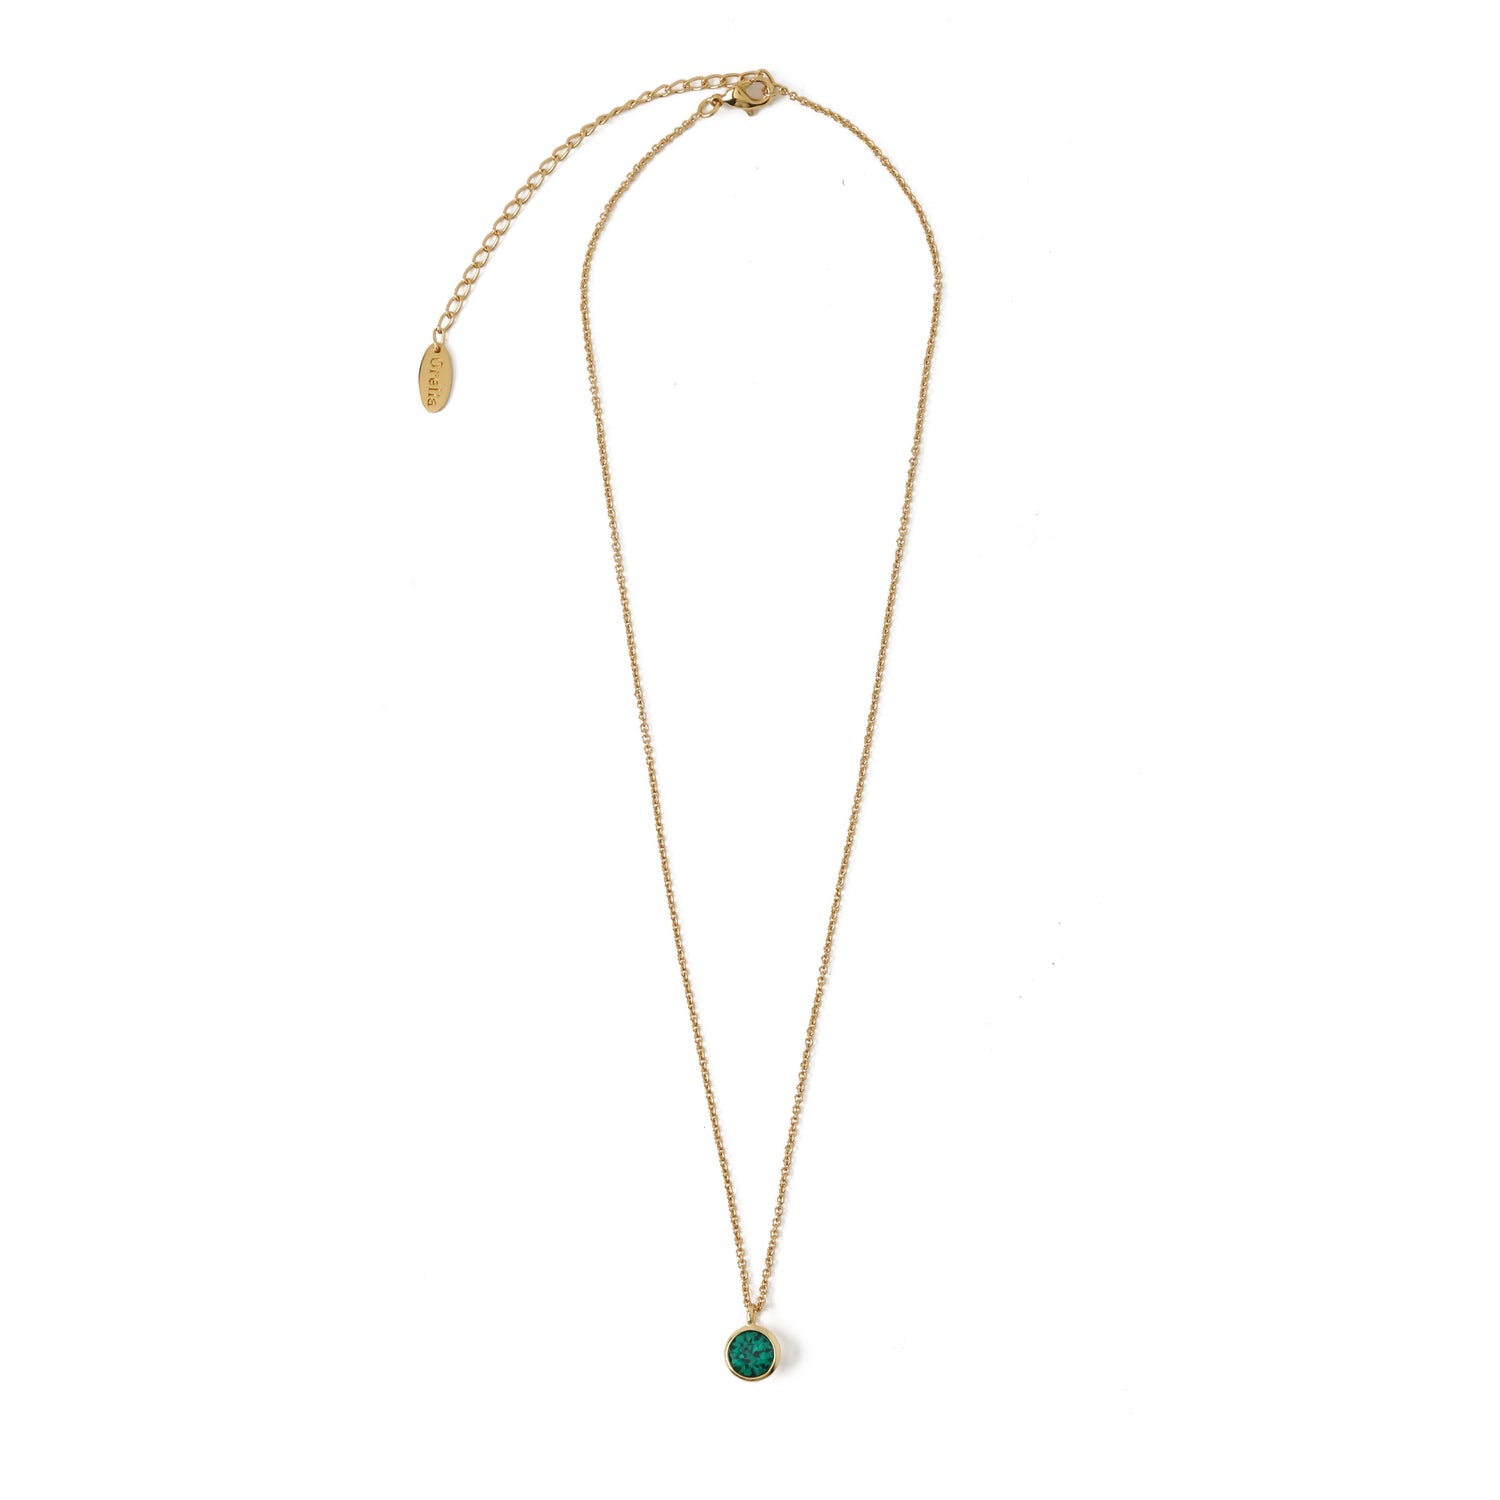 Emerald Necklace Made With Swarovski® Crystals - Gold